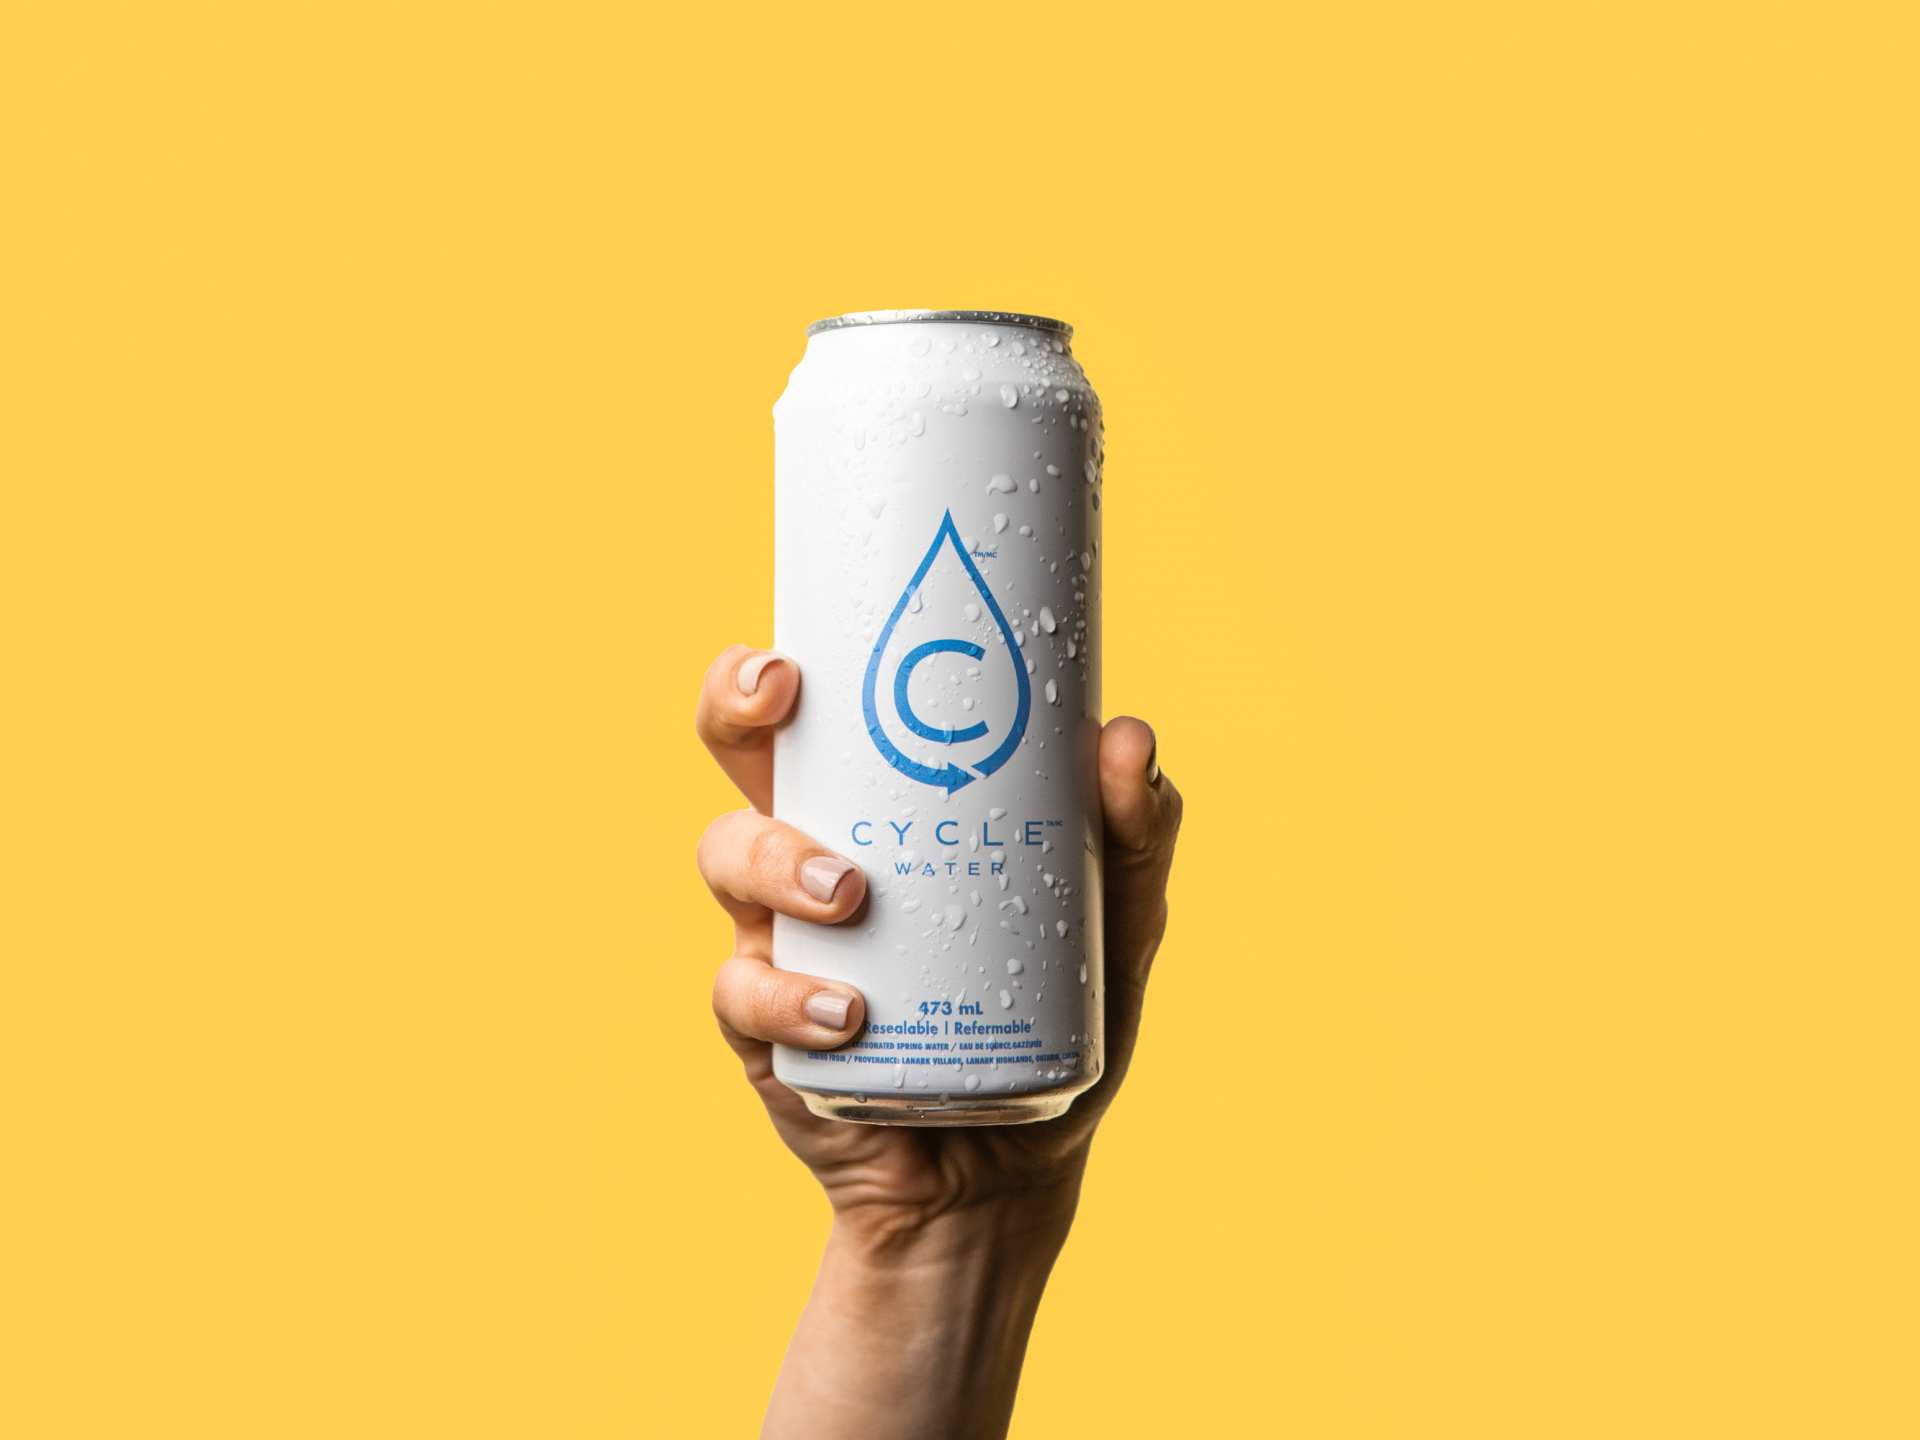 Sparkling Water | Ontario-based Cycle water